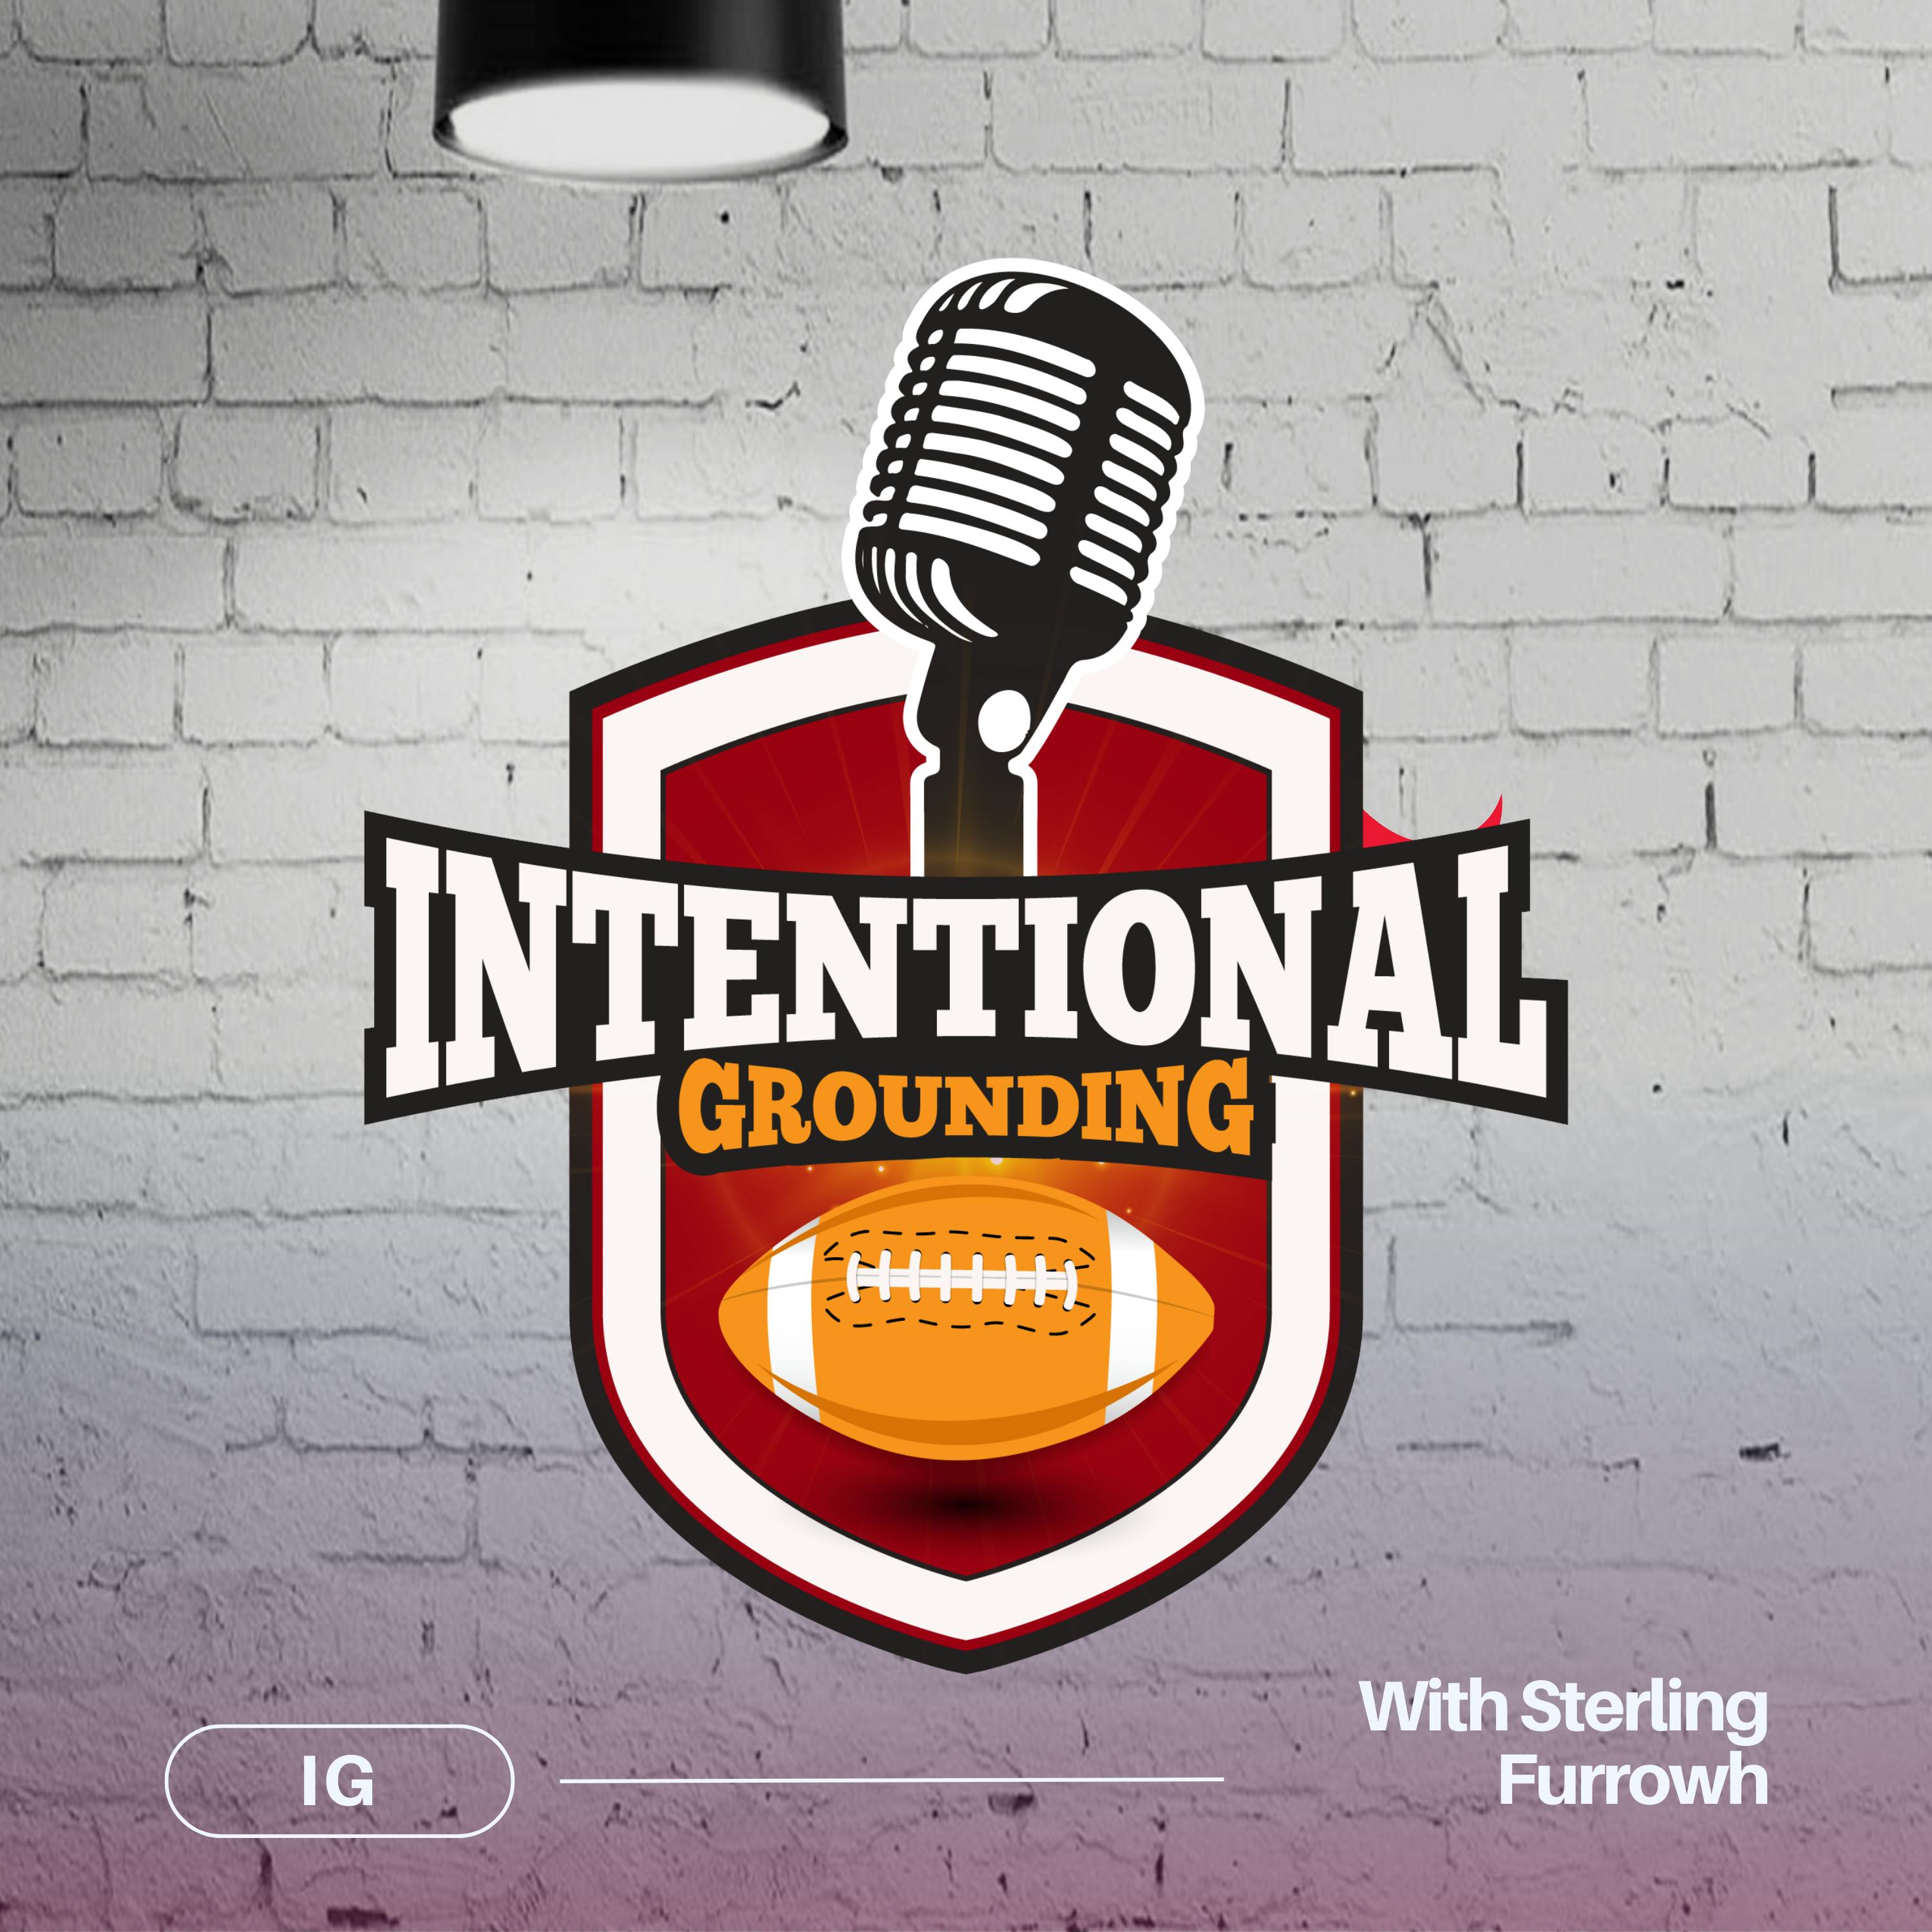 Intentional Grounding: Buffalo Rumblings Post Game Show Vs Pittsburg Steelers ”Championship DNA”